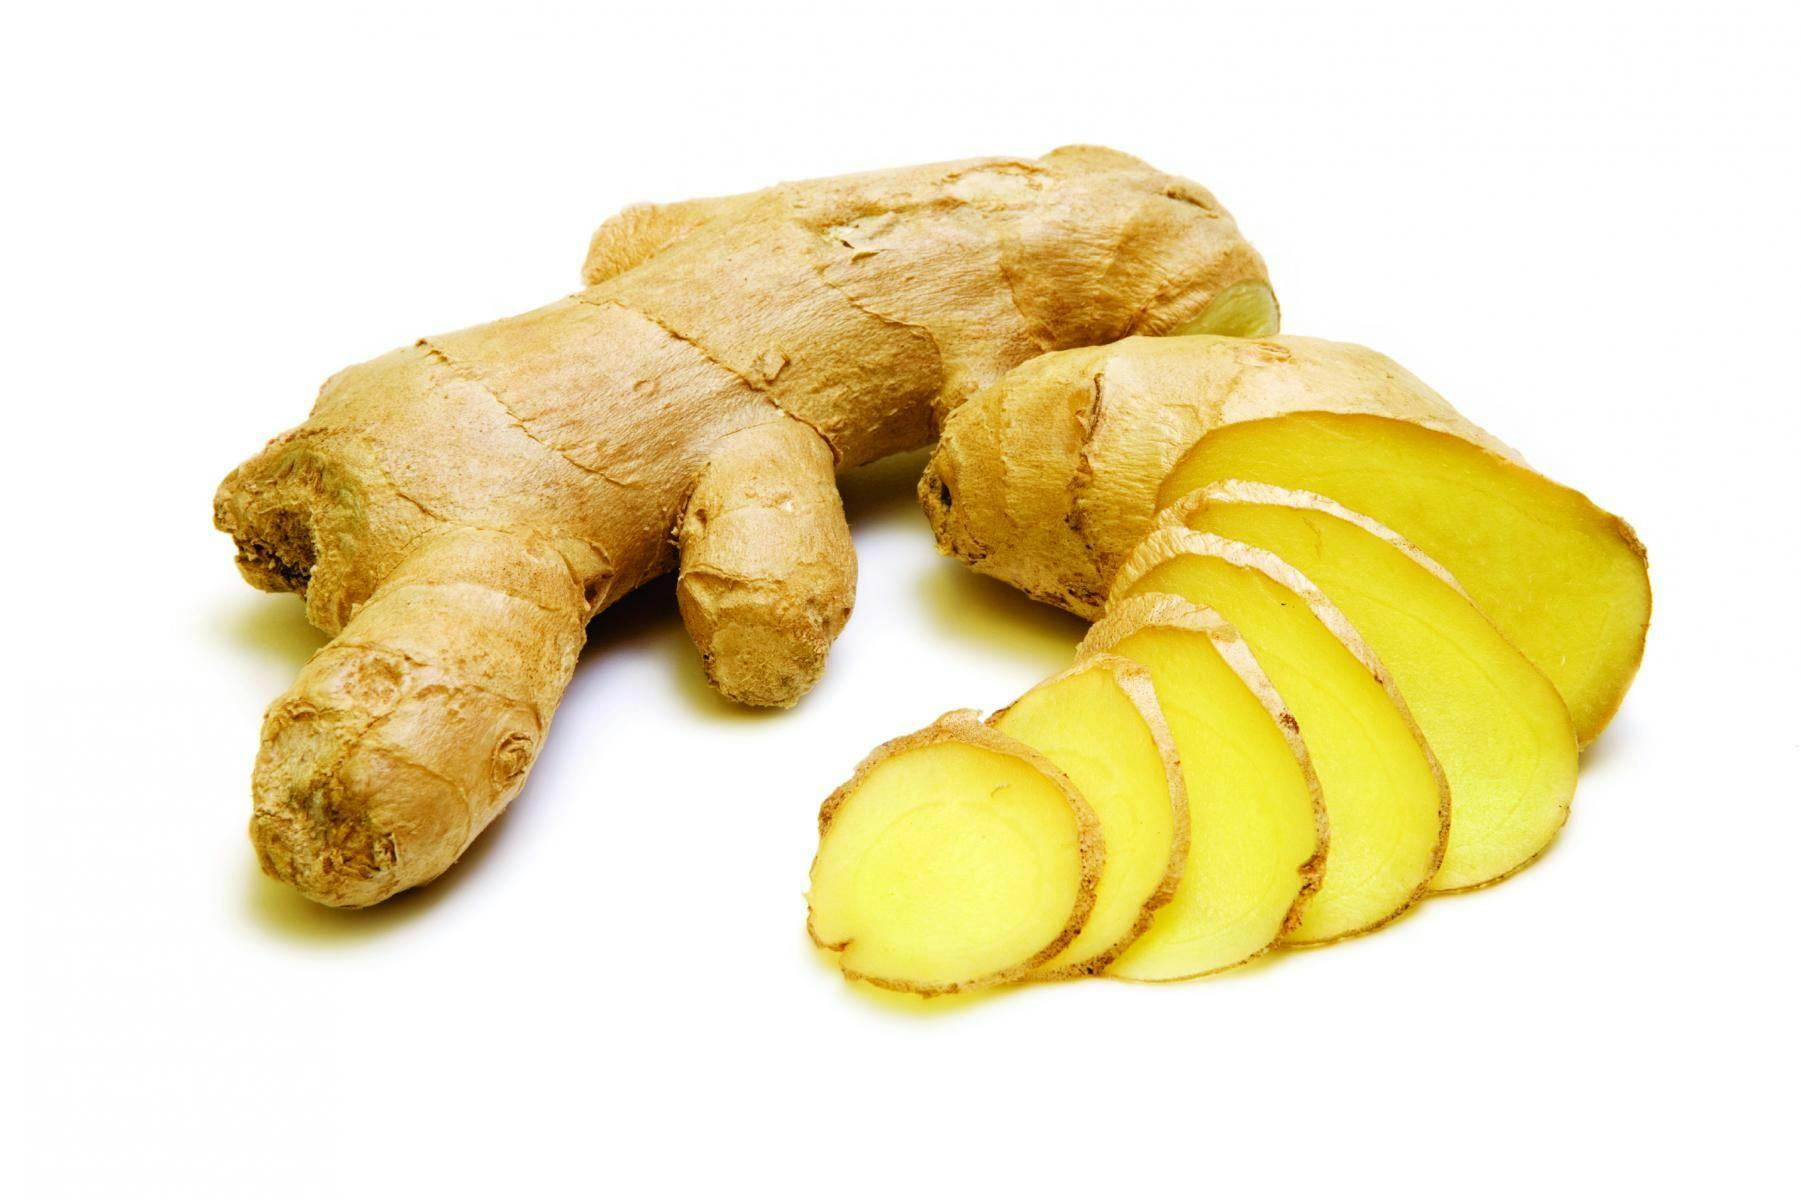 Ginger Root: The Latest Beauty Ingredient?